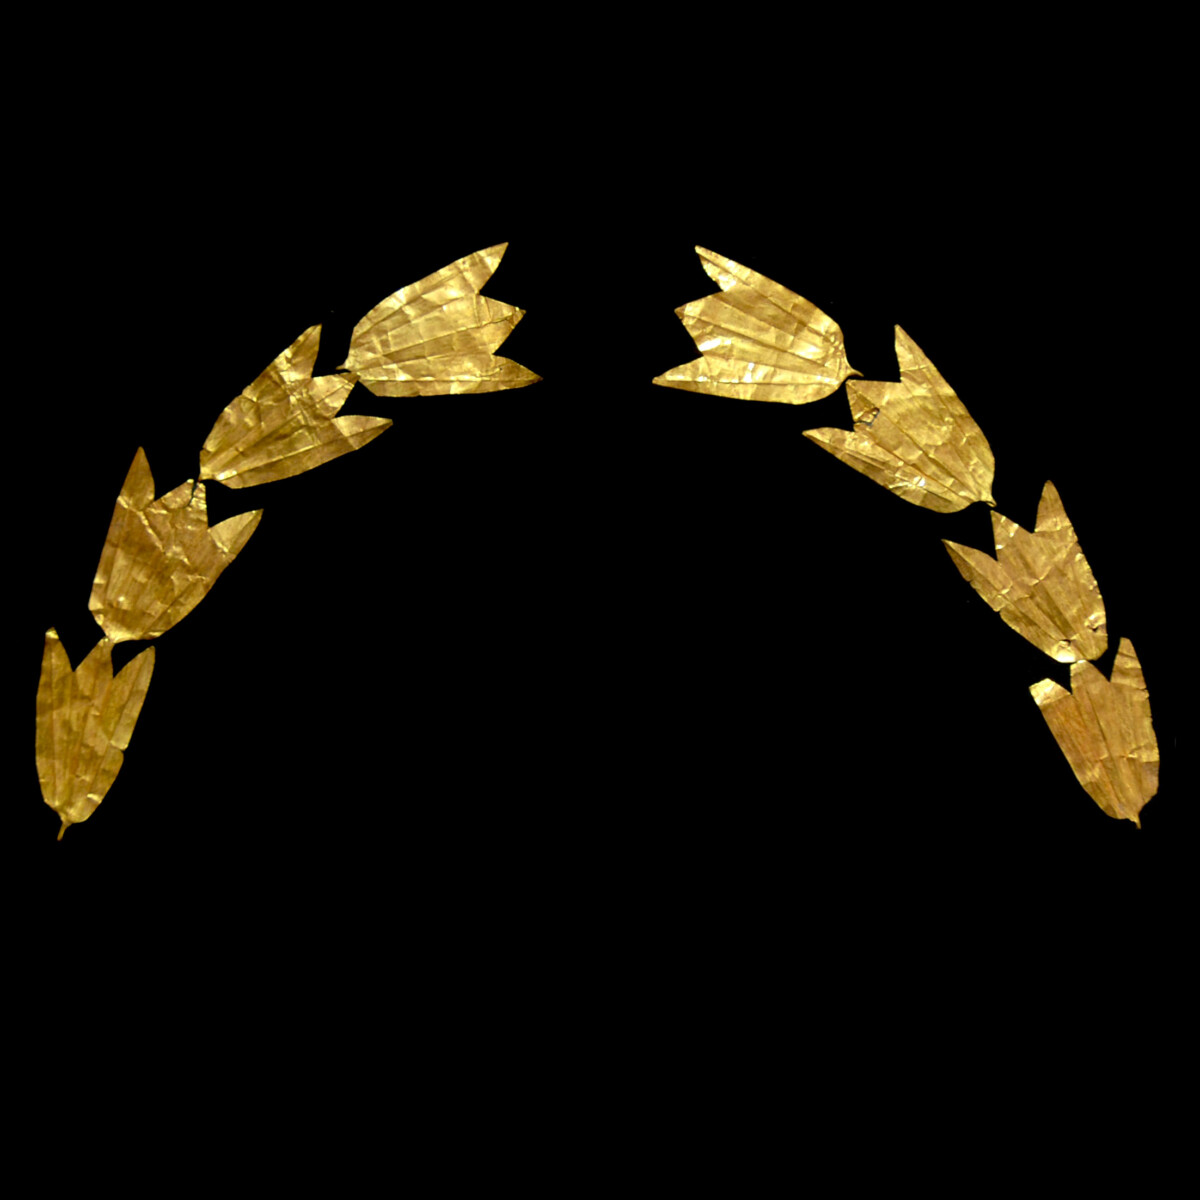 Gold sheets in the form of laurel leaves hellenistic diadem